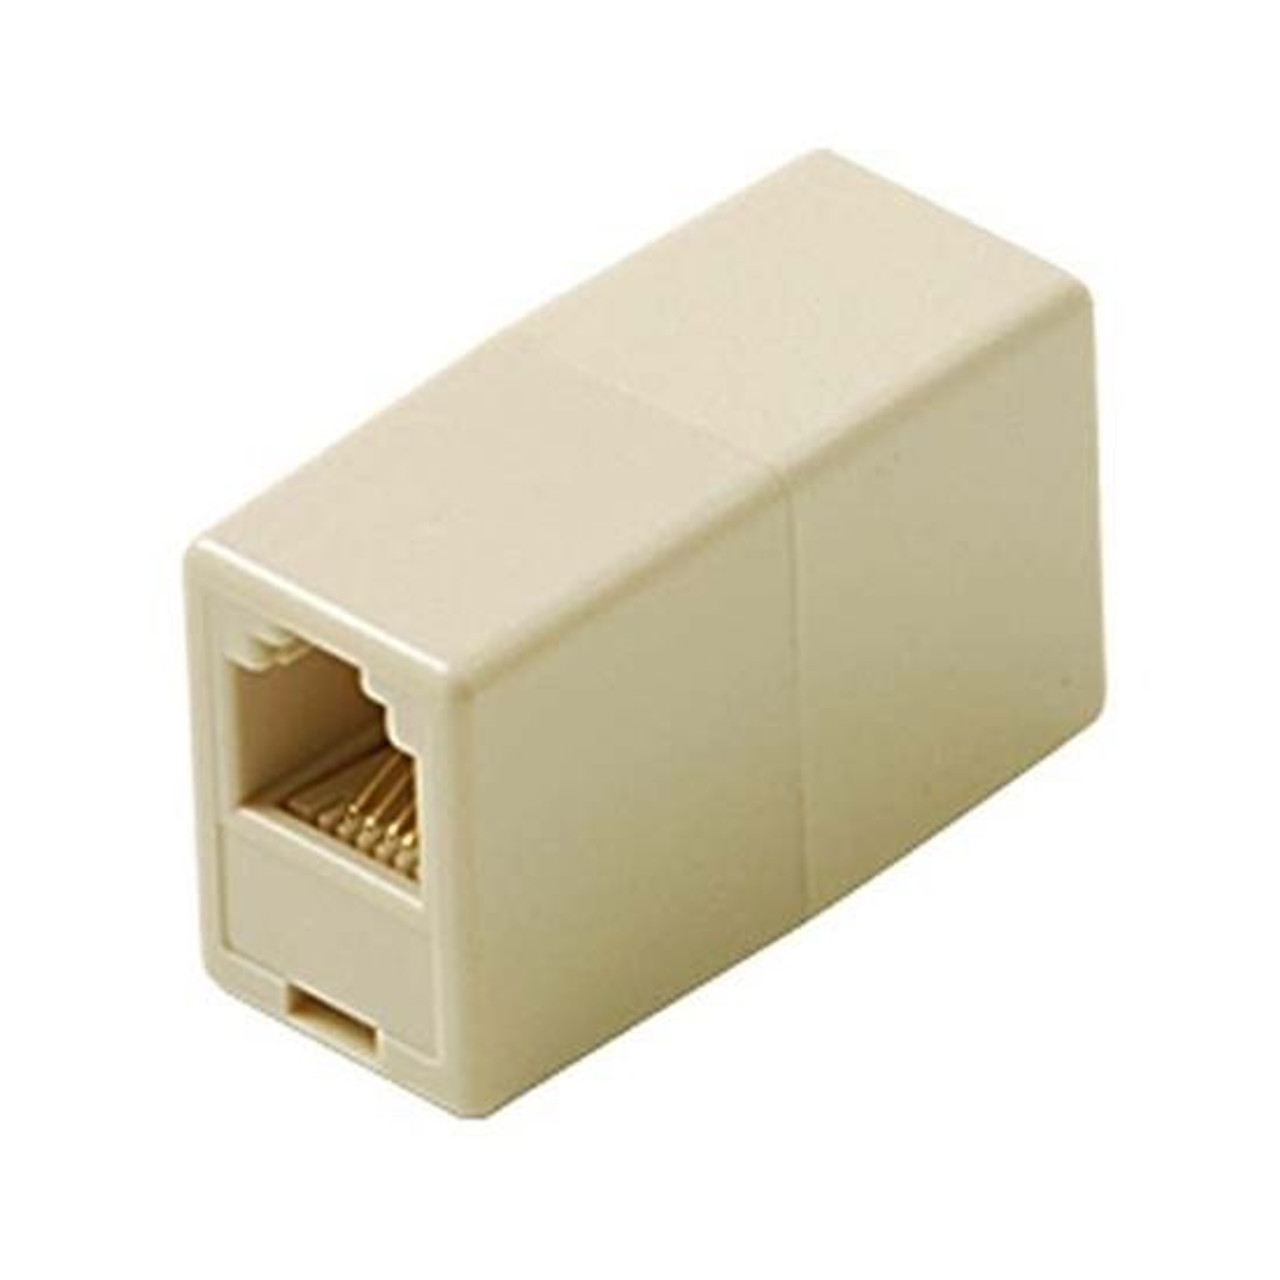 Summit 4C Ivory Coupler Conductor Modular Phone In-Line Telephone Cord Extension Plug Connection Line Snap-In